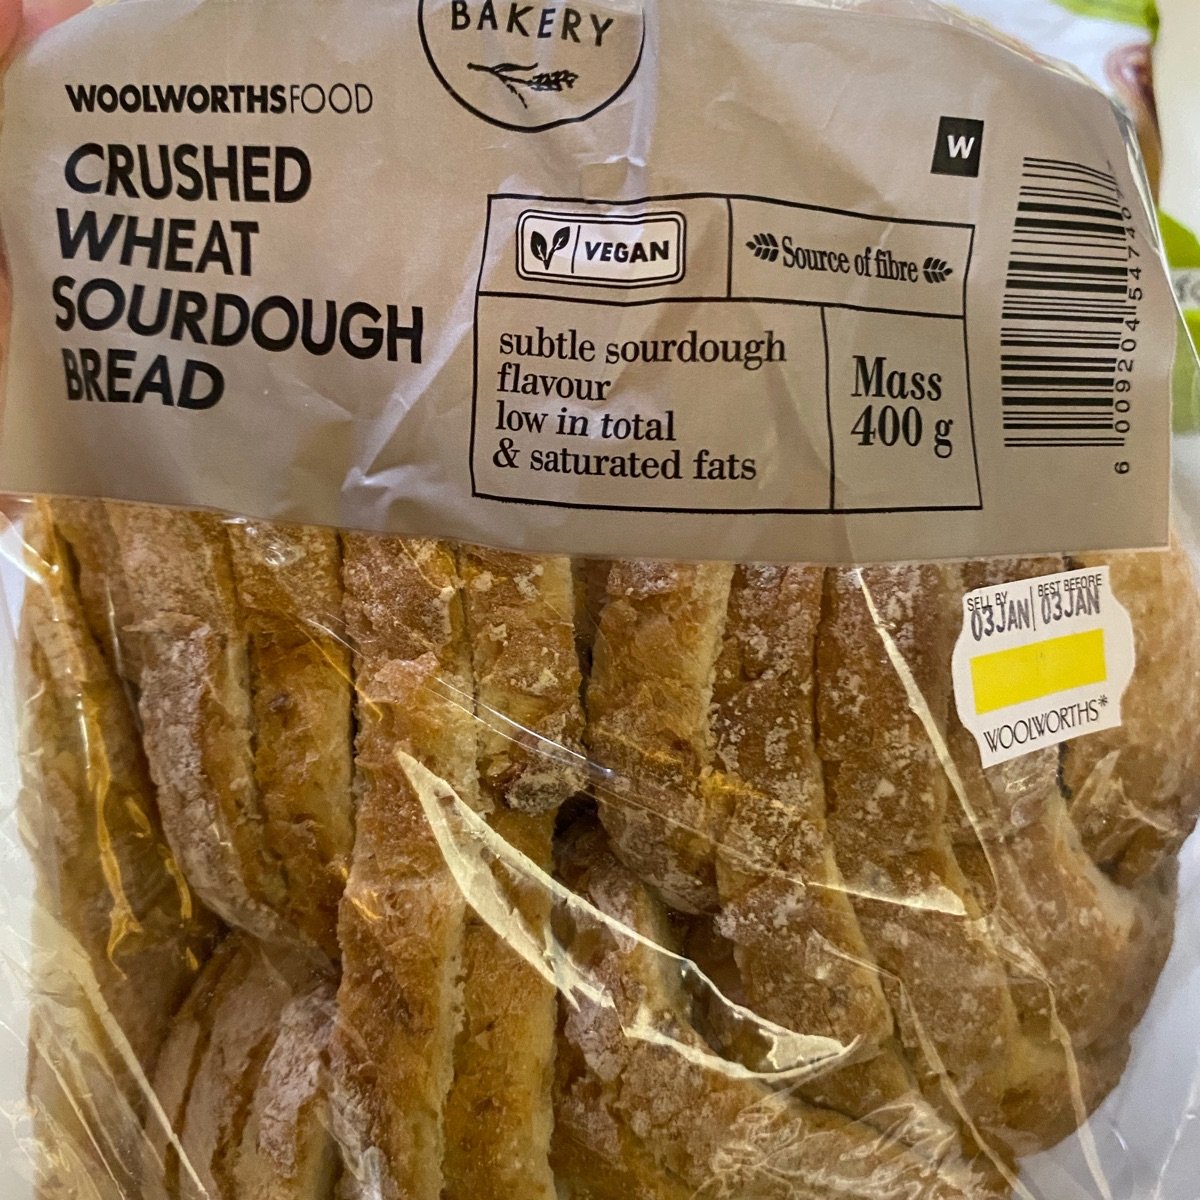 Woolworths Food Crushed Wheat Sourdough Bread Reviews | abillion